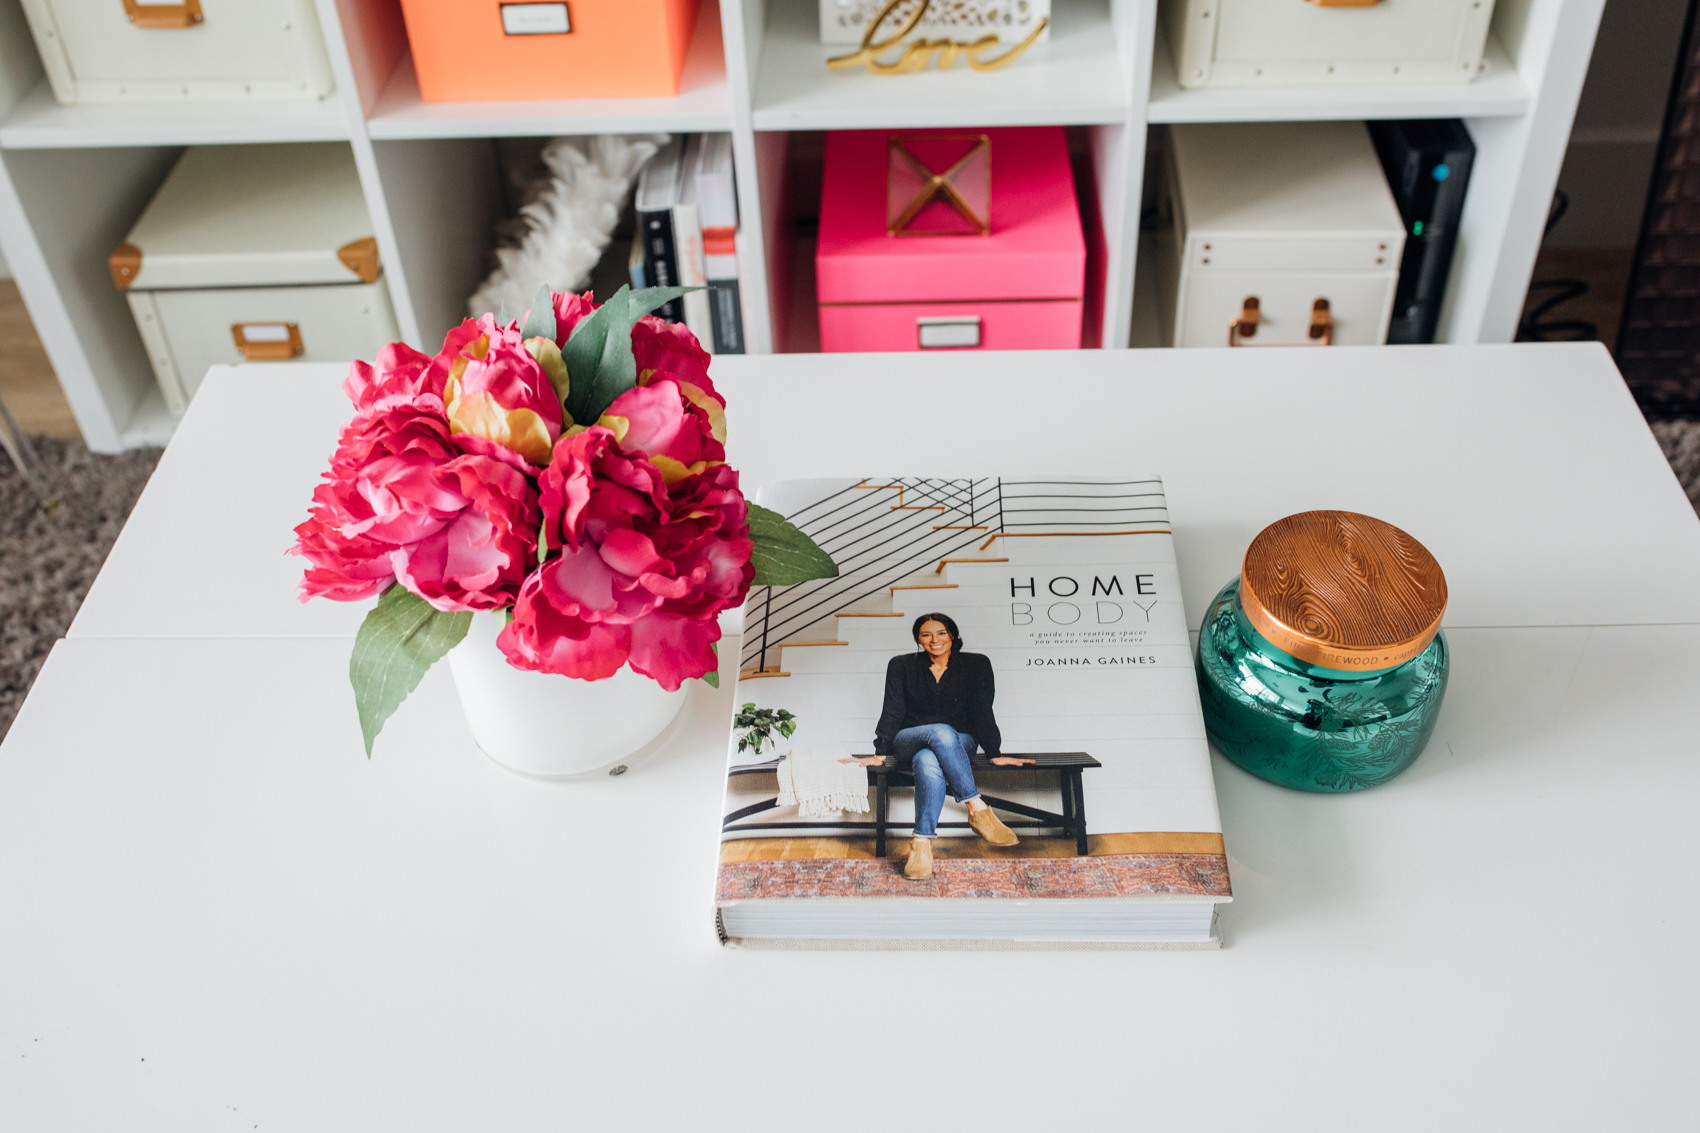 Blogger Hoang-Kim shares her living room decor and organization